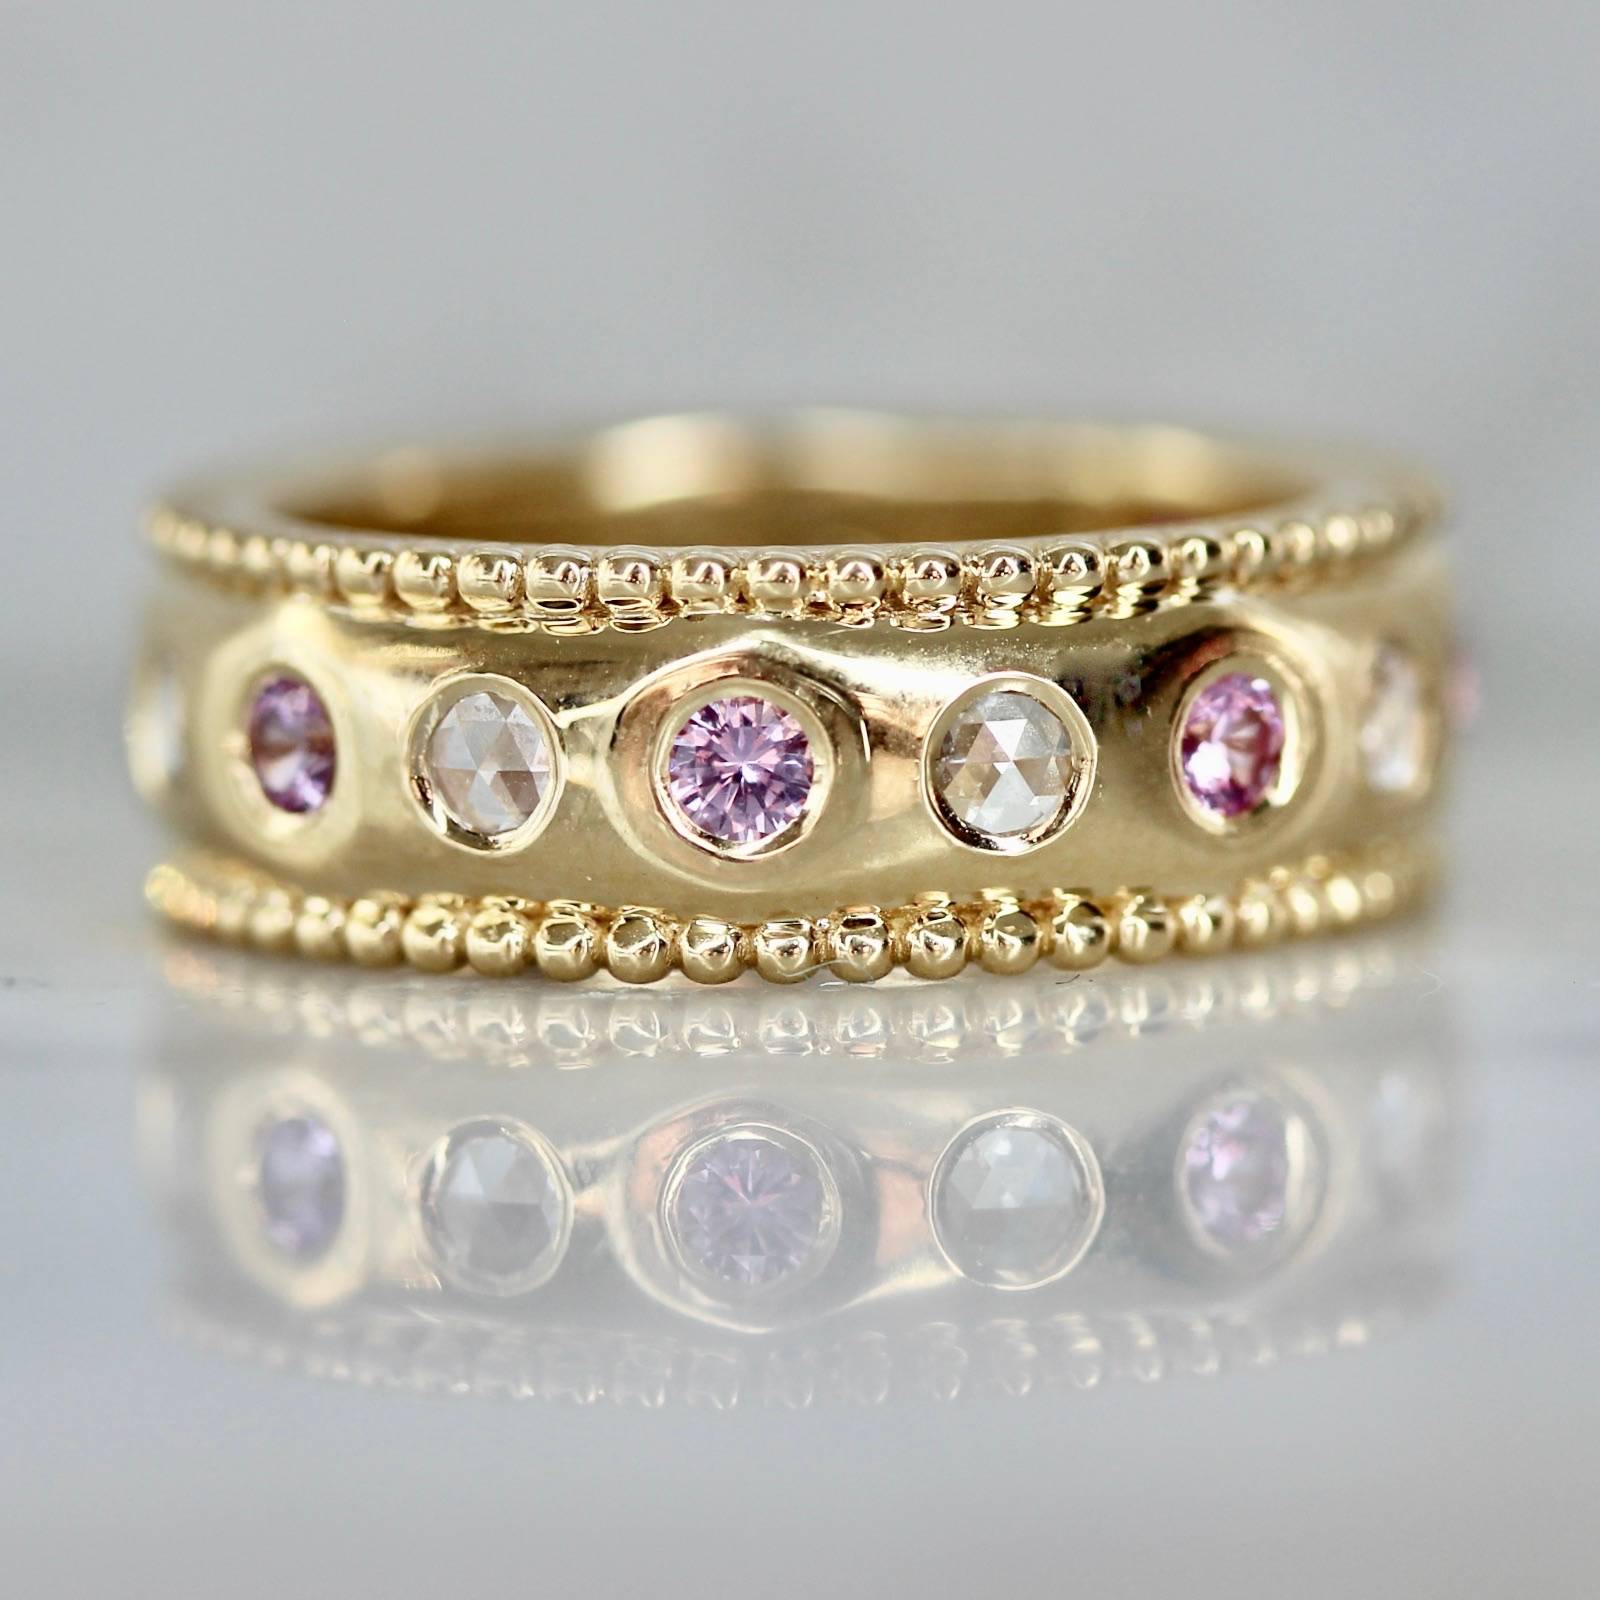 Thick gold band with pink sapphires and diamonds